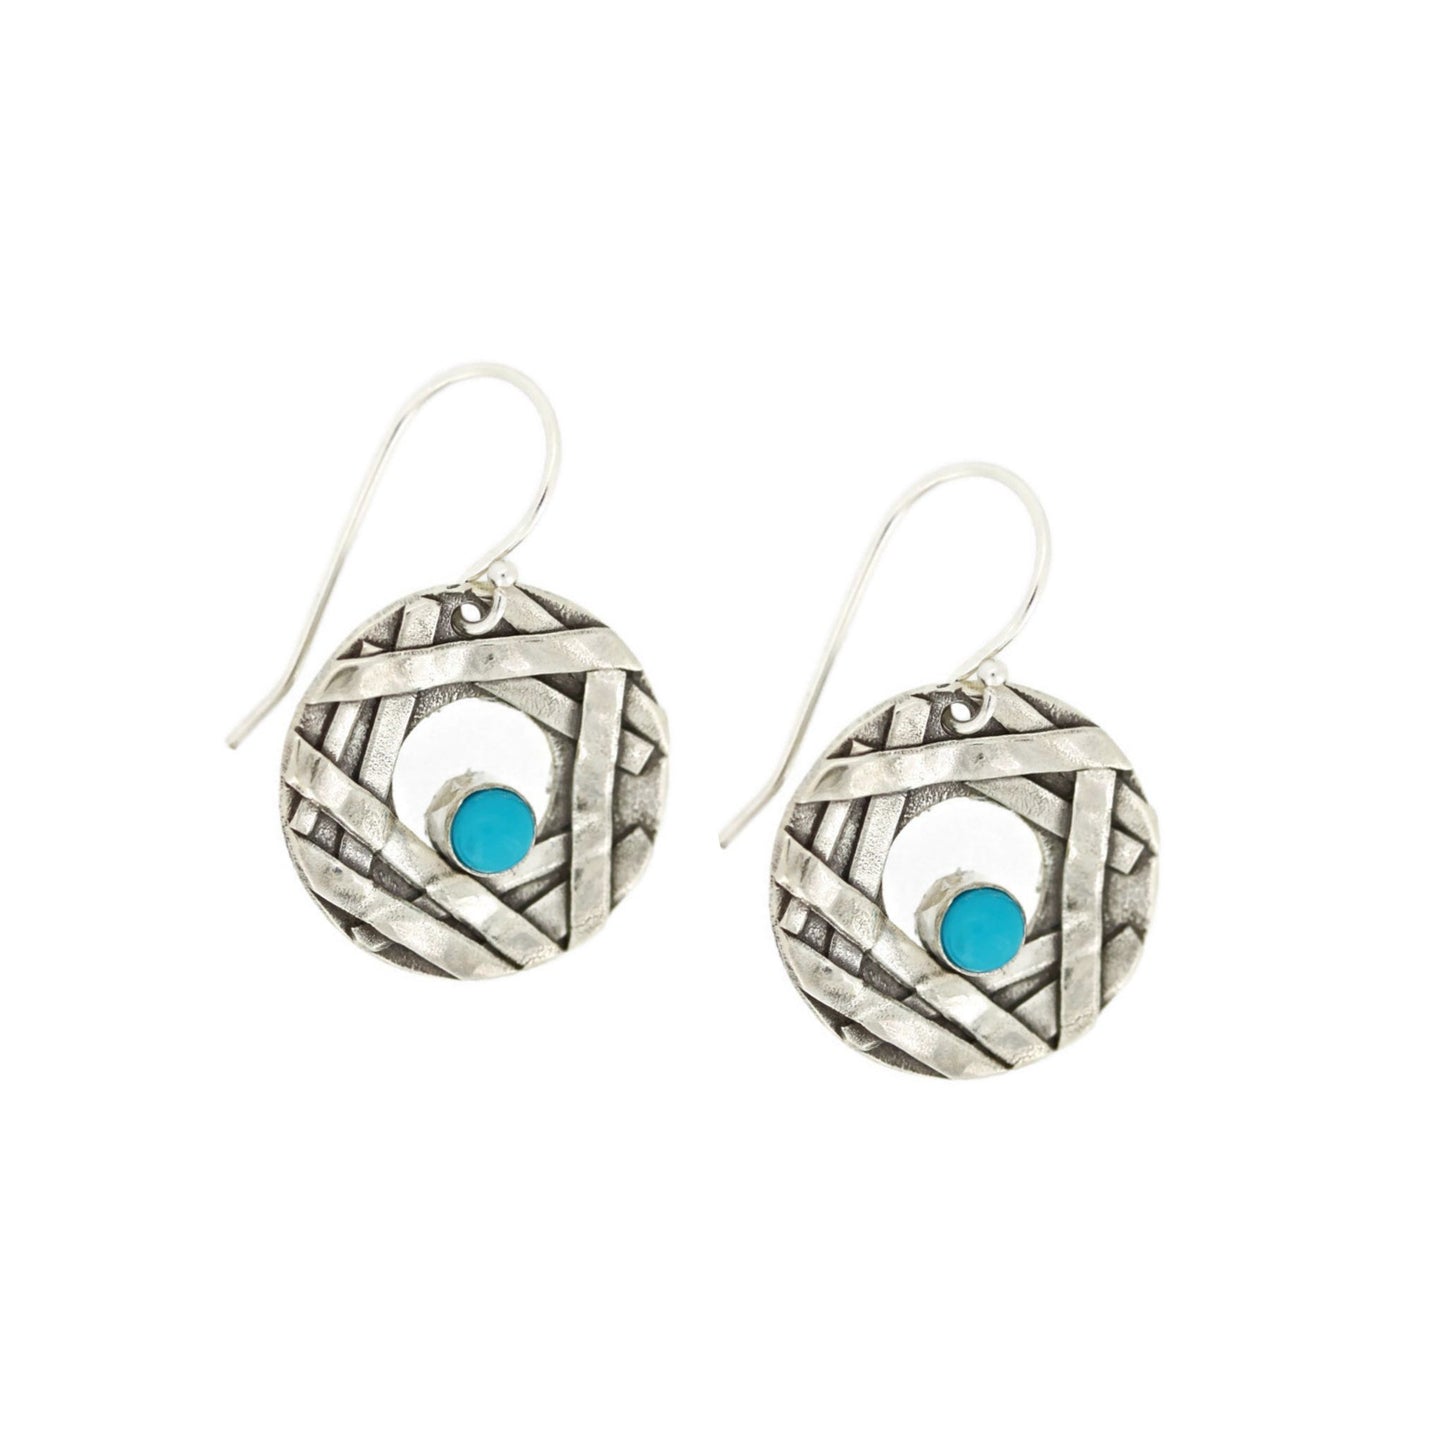 Turquoise round washer earrings